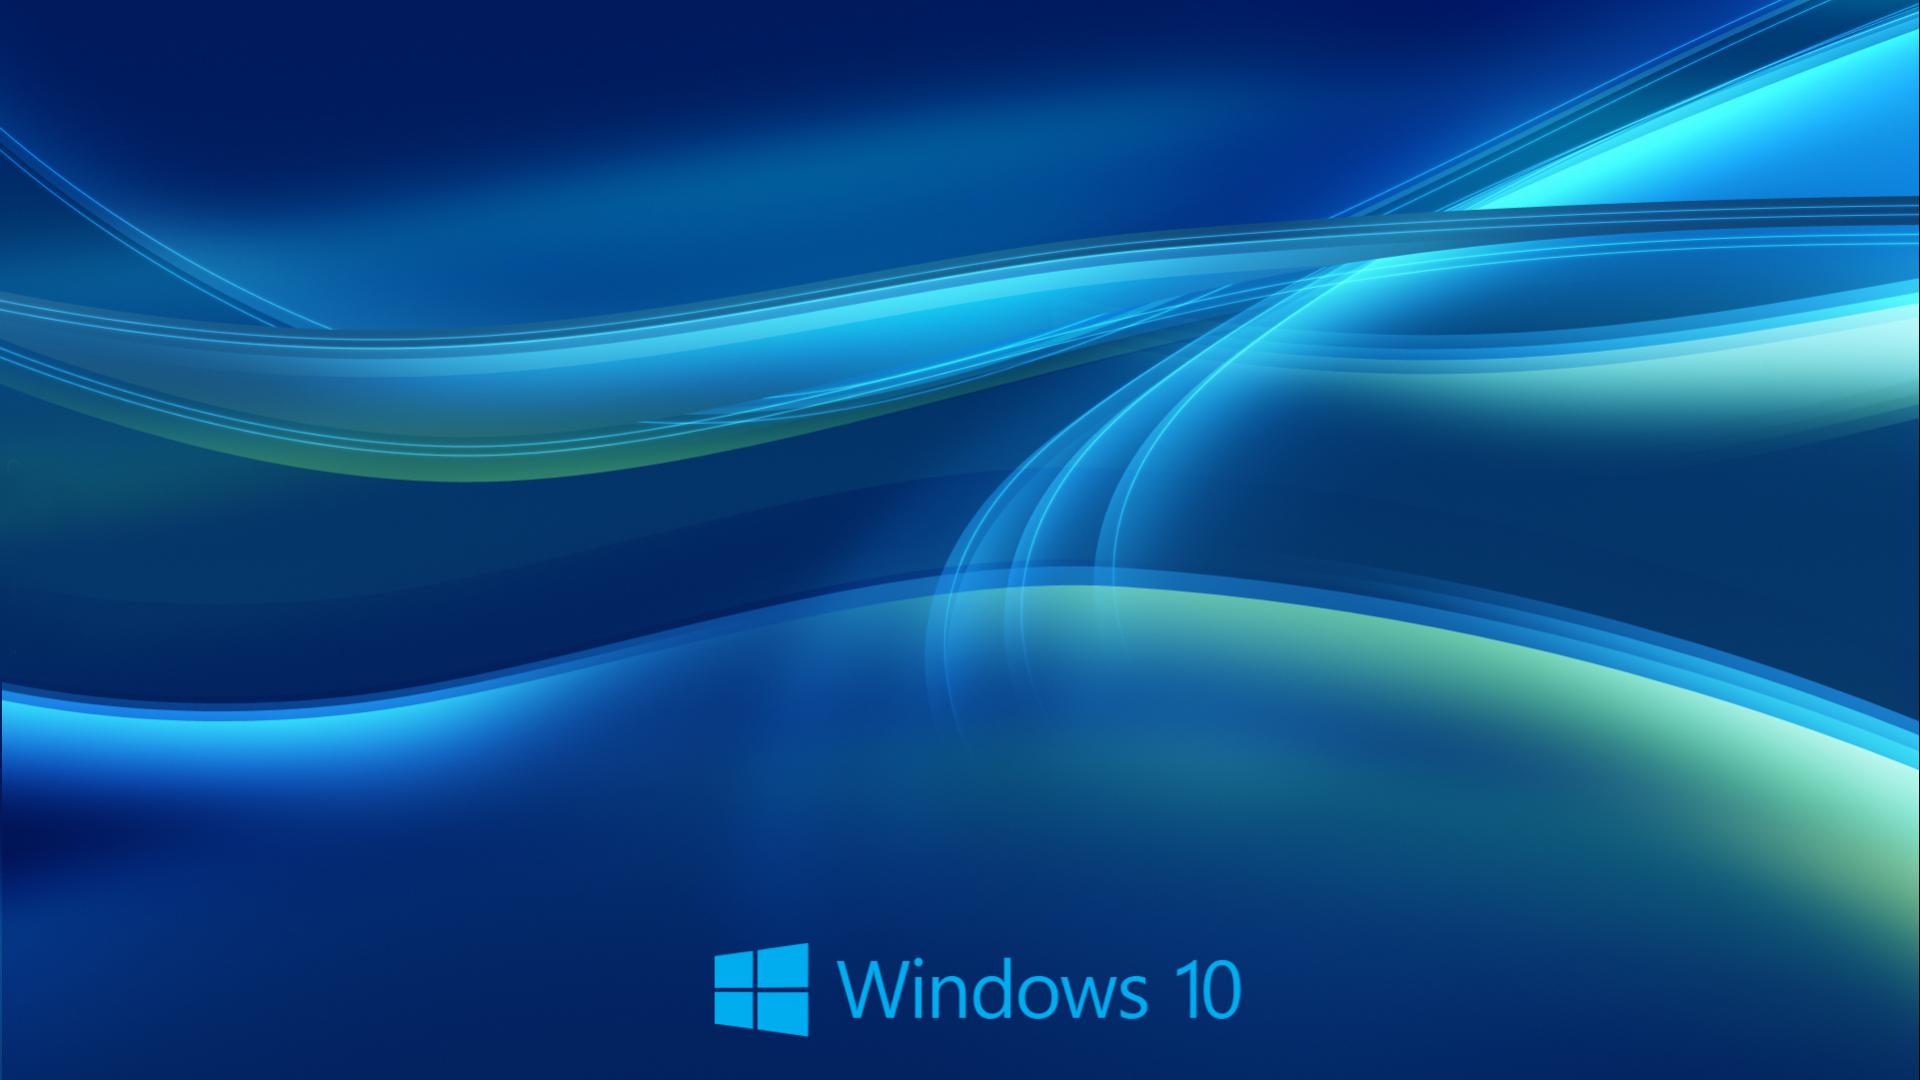 Windows Wallpaper HD in Blue Abstract with New Logo HD Wallpapers